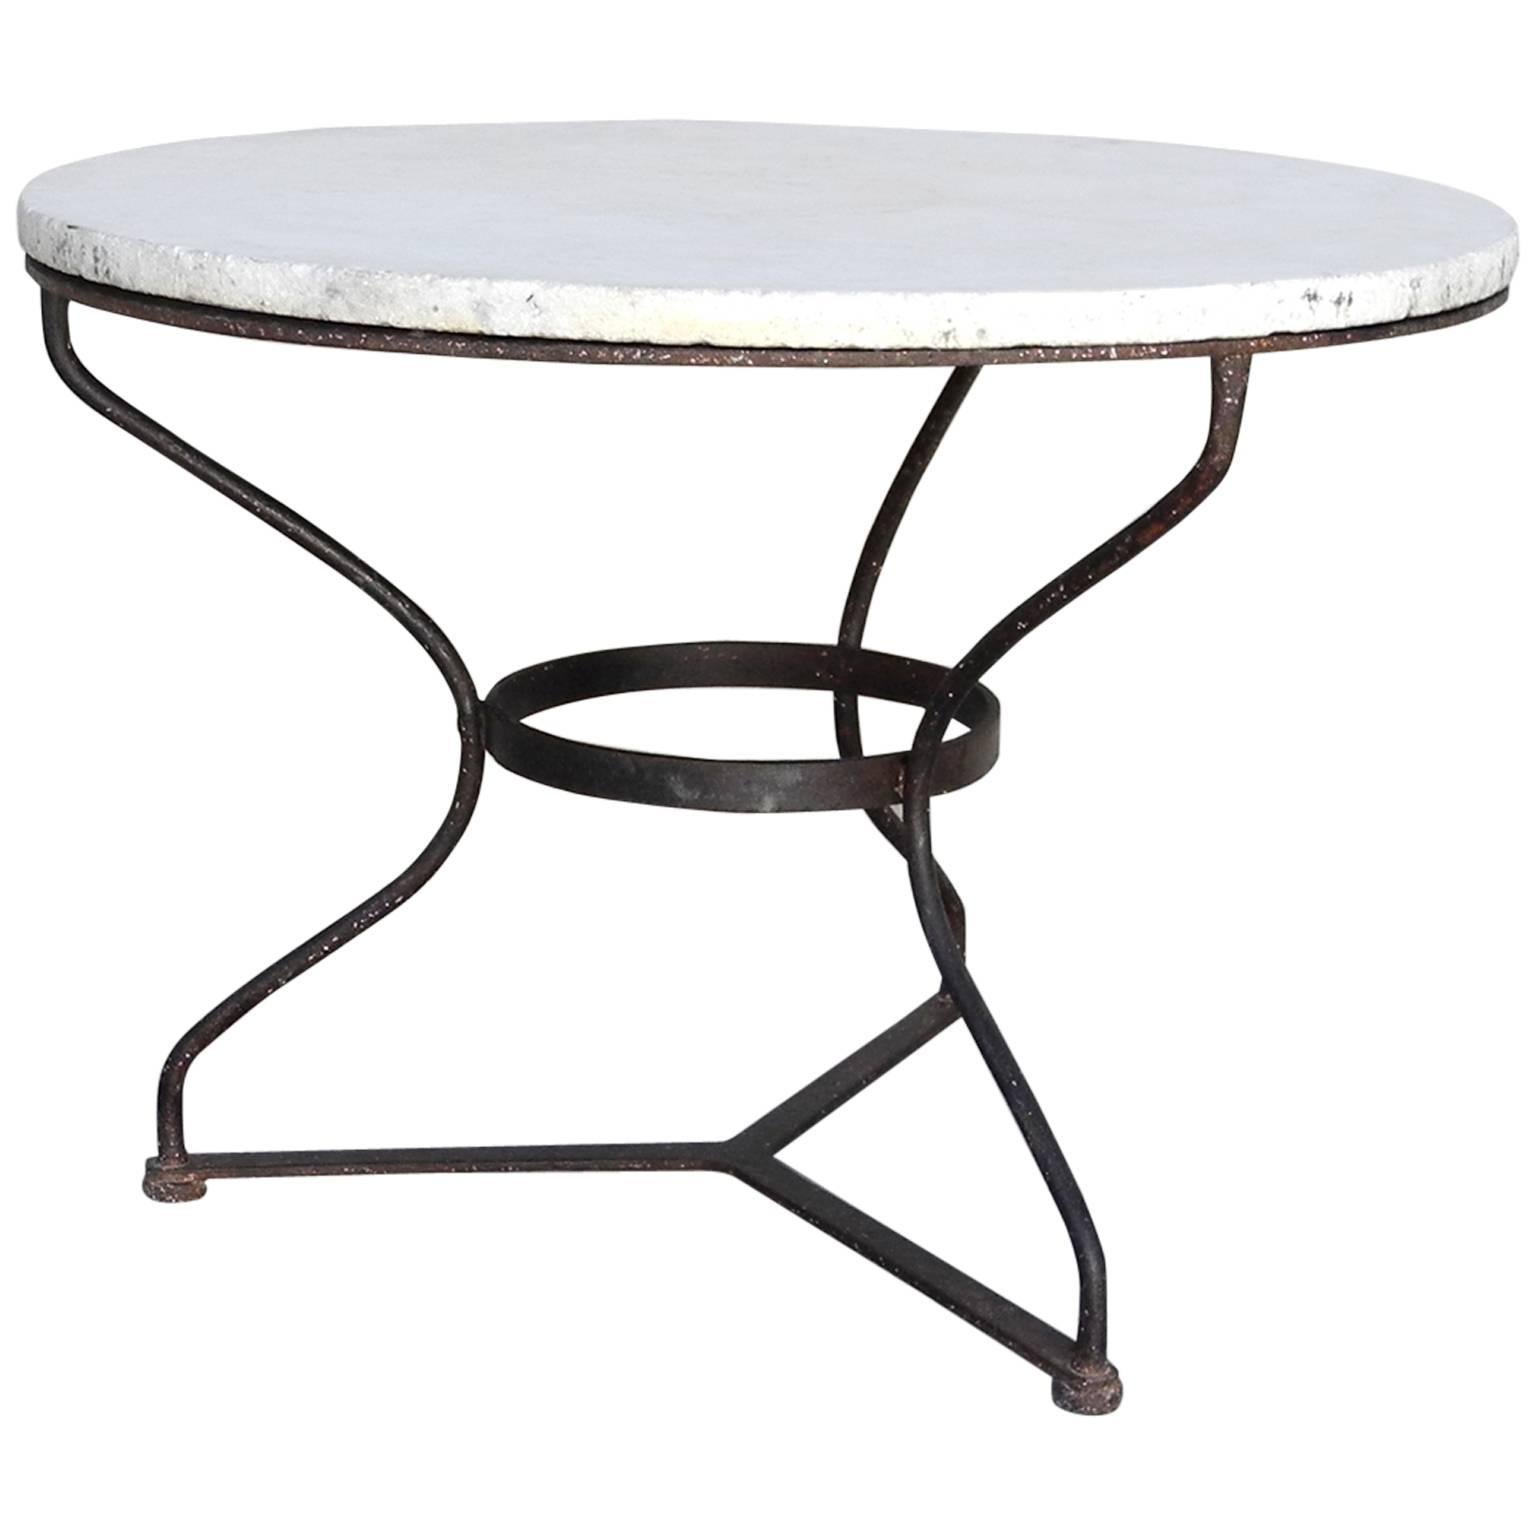 Antique French Marble Gueridon Table with Iron Base, Circa 1950